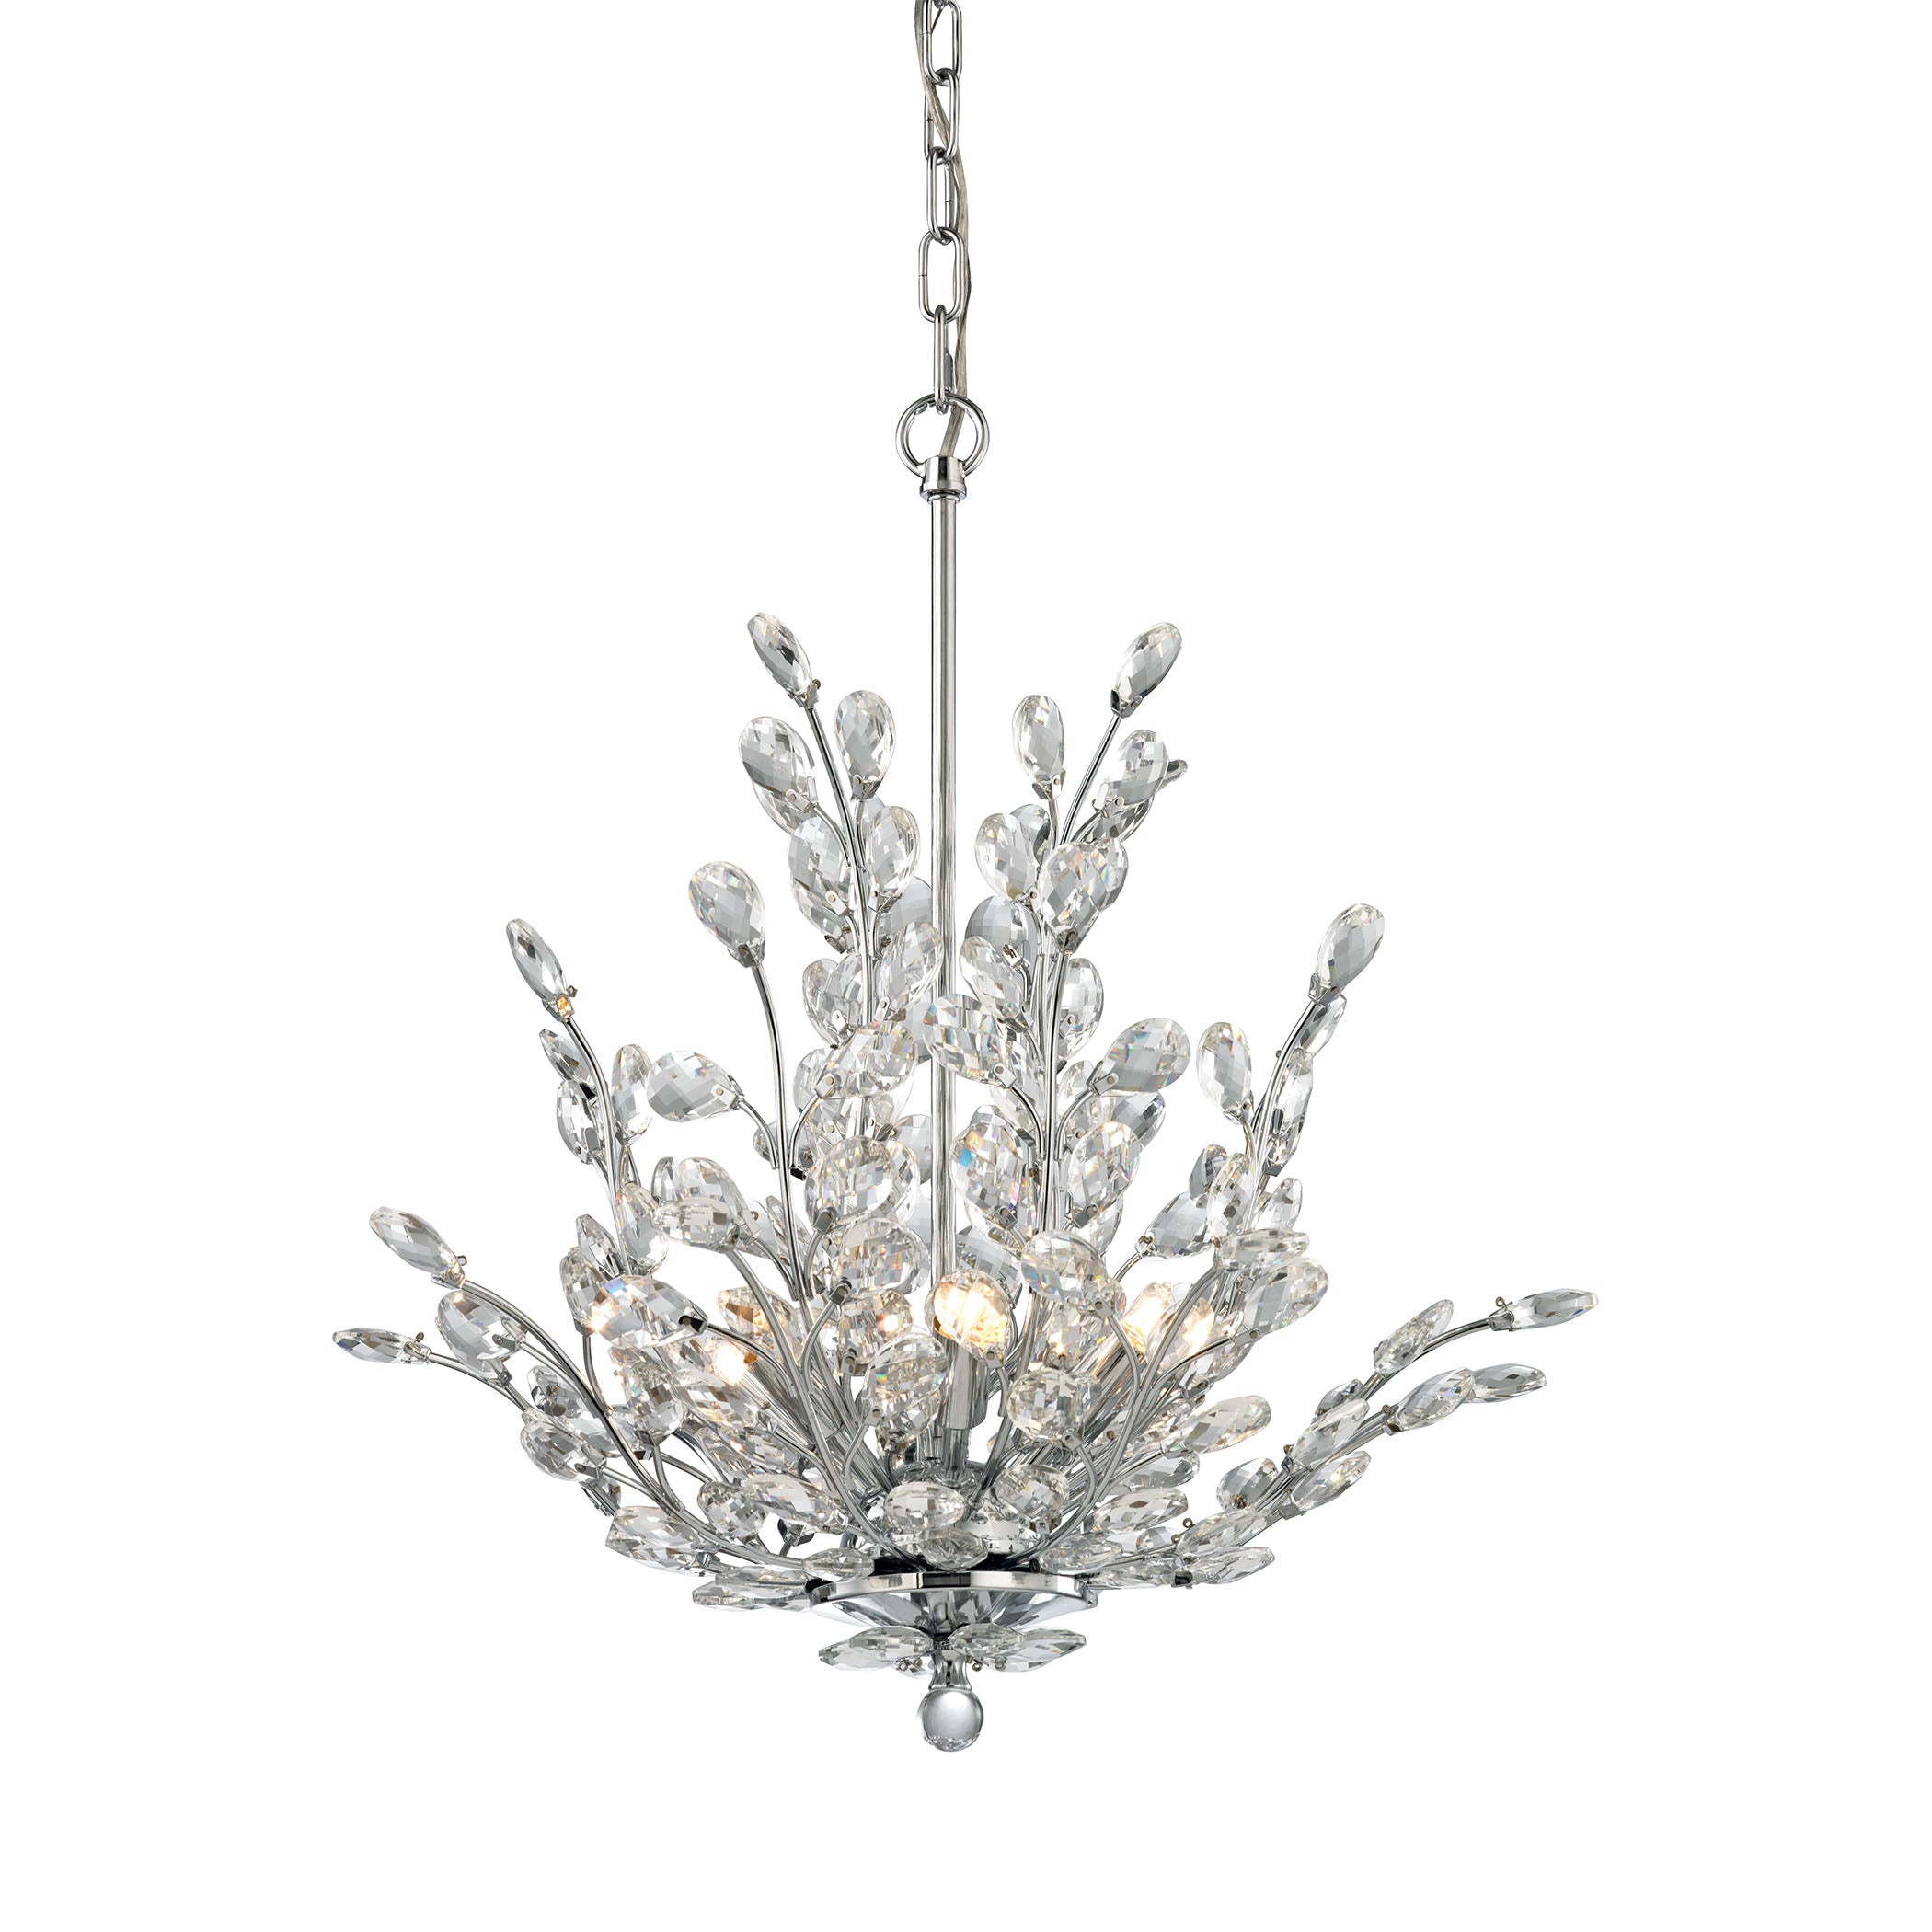 ELK Lighting 45262/6 Crystique 6-Light Chandelier in Polished Chrome with Branch Metalwork and Clear Crystal